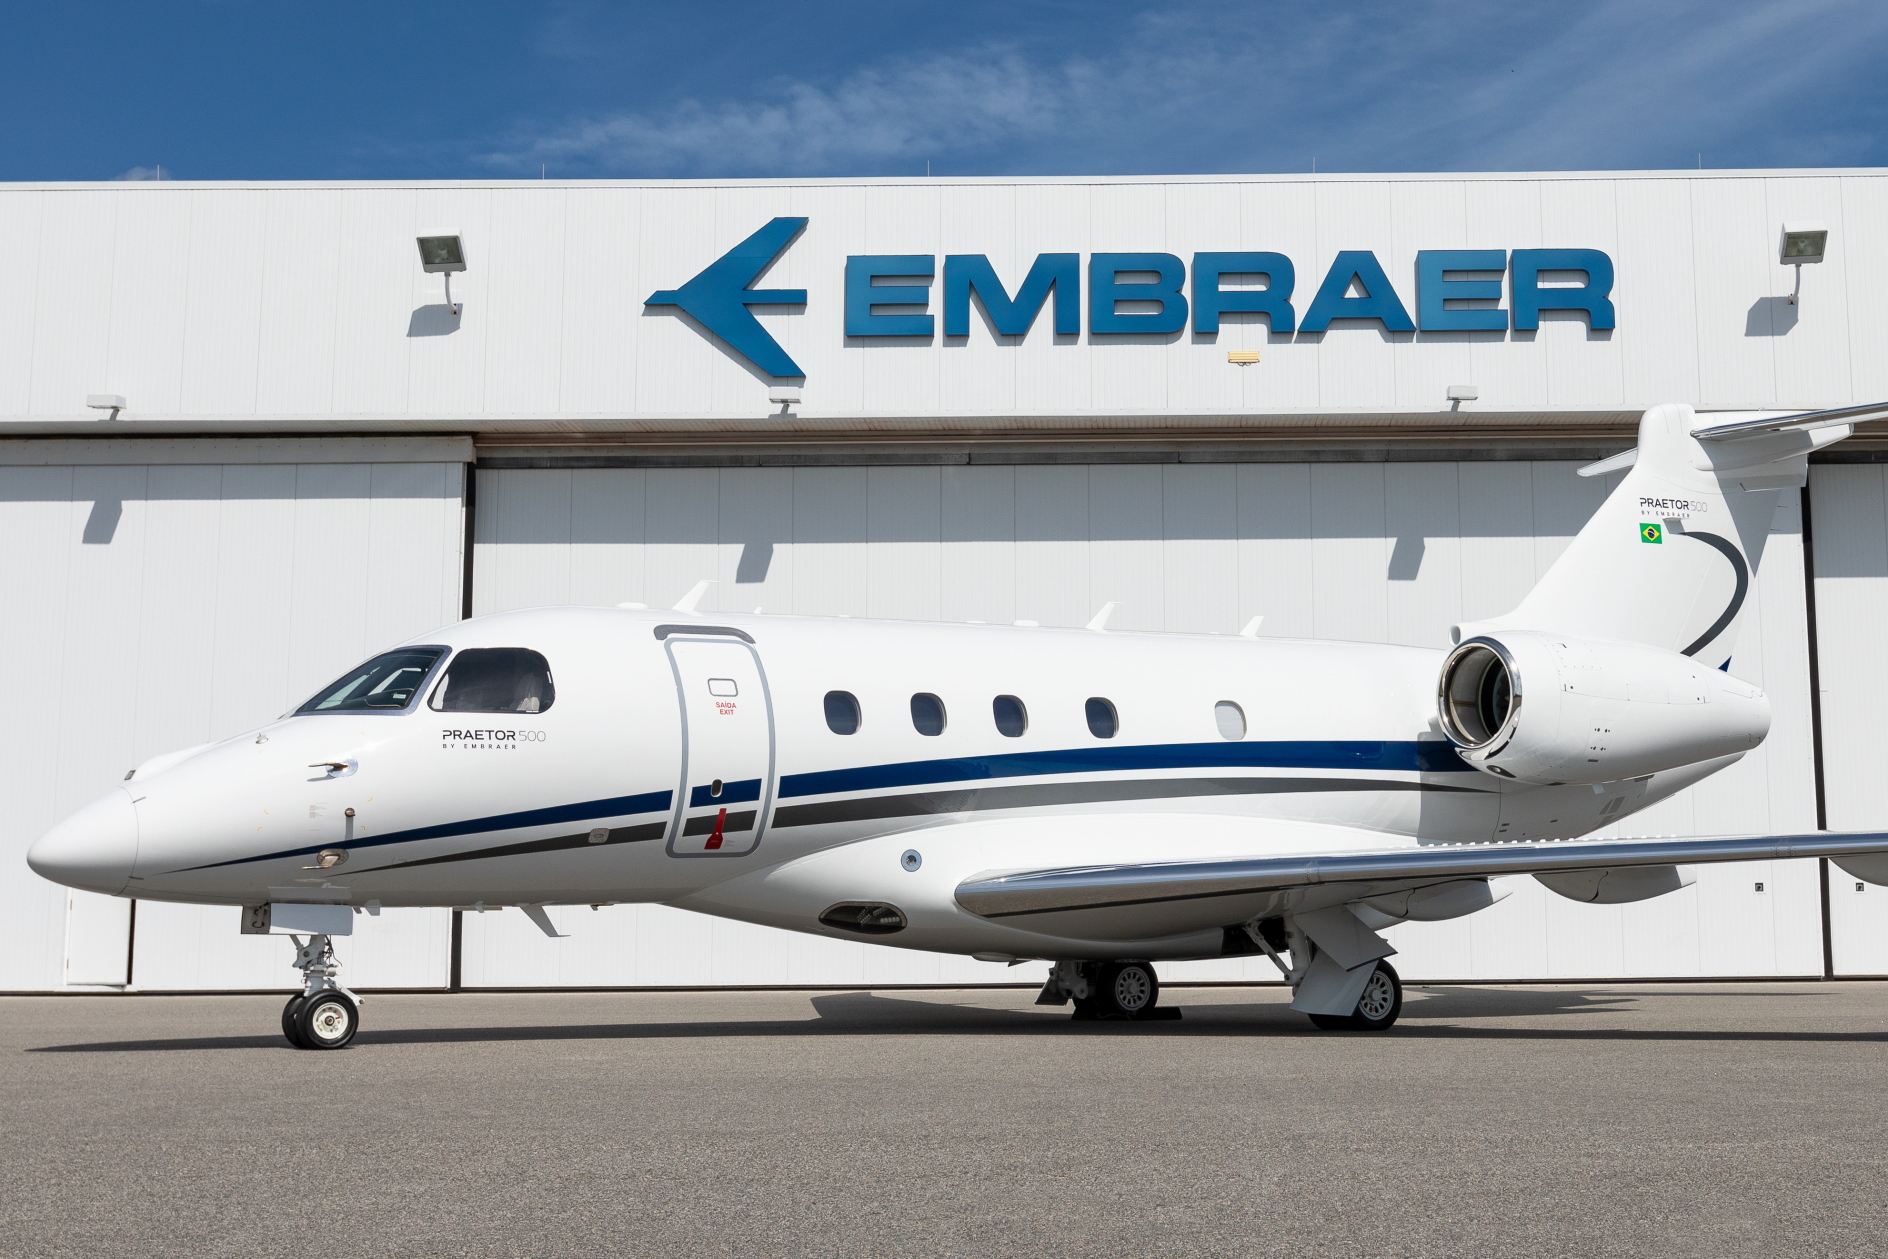 Embraer recently delivered a Praetor 500 to an undisclosed customer in Brazil, the first delivery of the aircraft type in the country. The Praetor 500 midsize business jet has a range of 3,340 nautical miles (6,186 km), with four passengers and NBAA IFR Reserves. Click to enlarge.